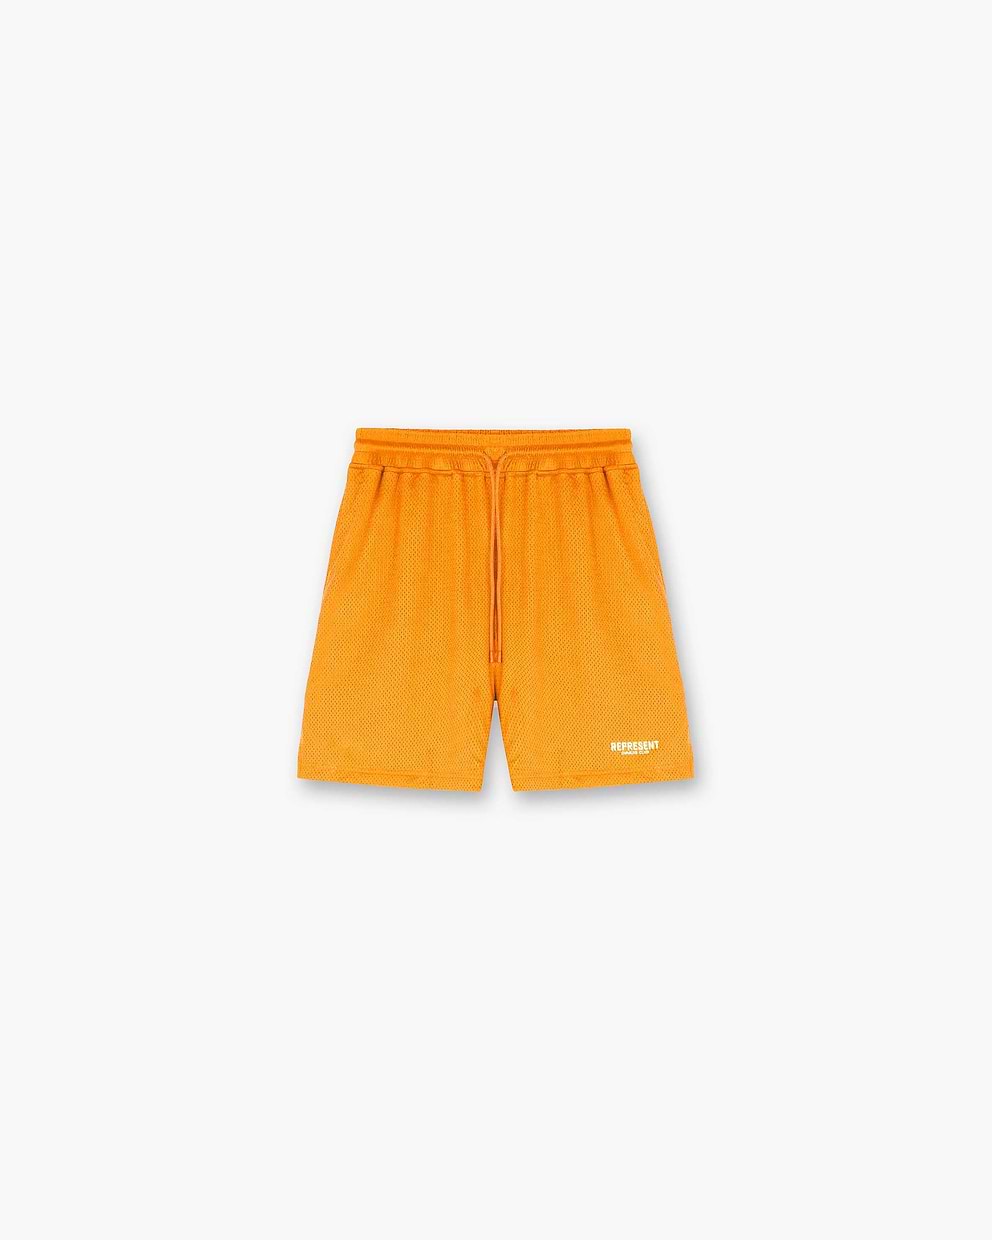 Represent Owners Club Mesh Shorts - Neon